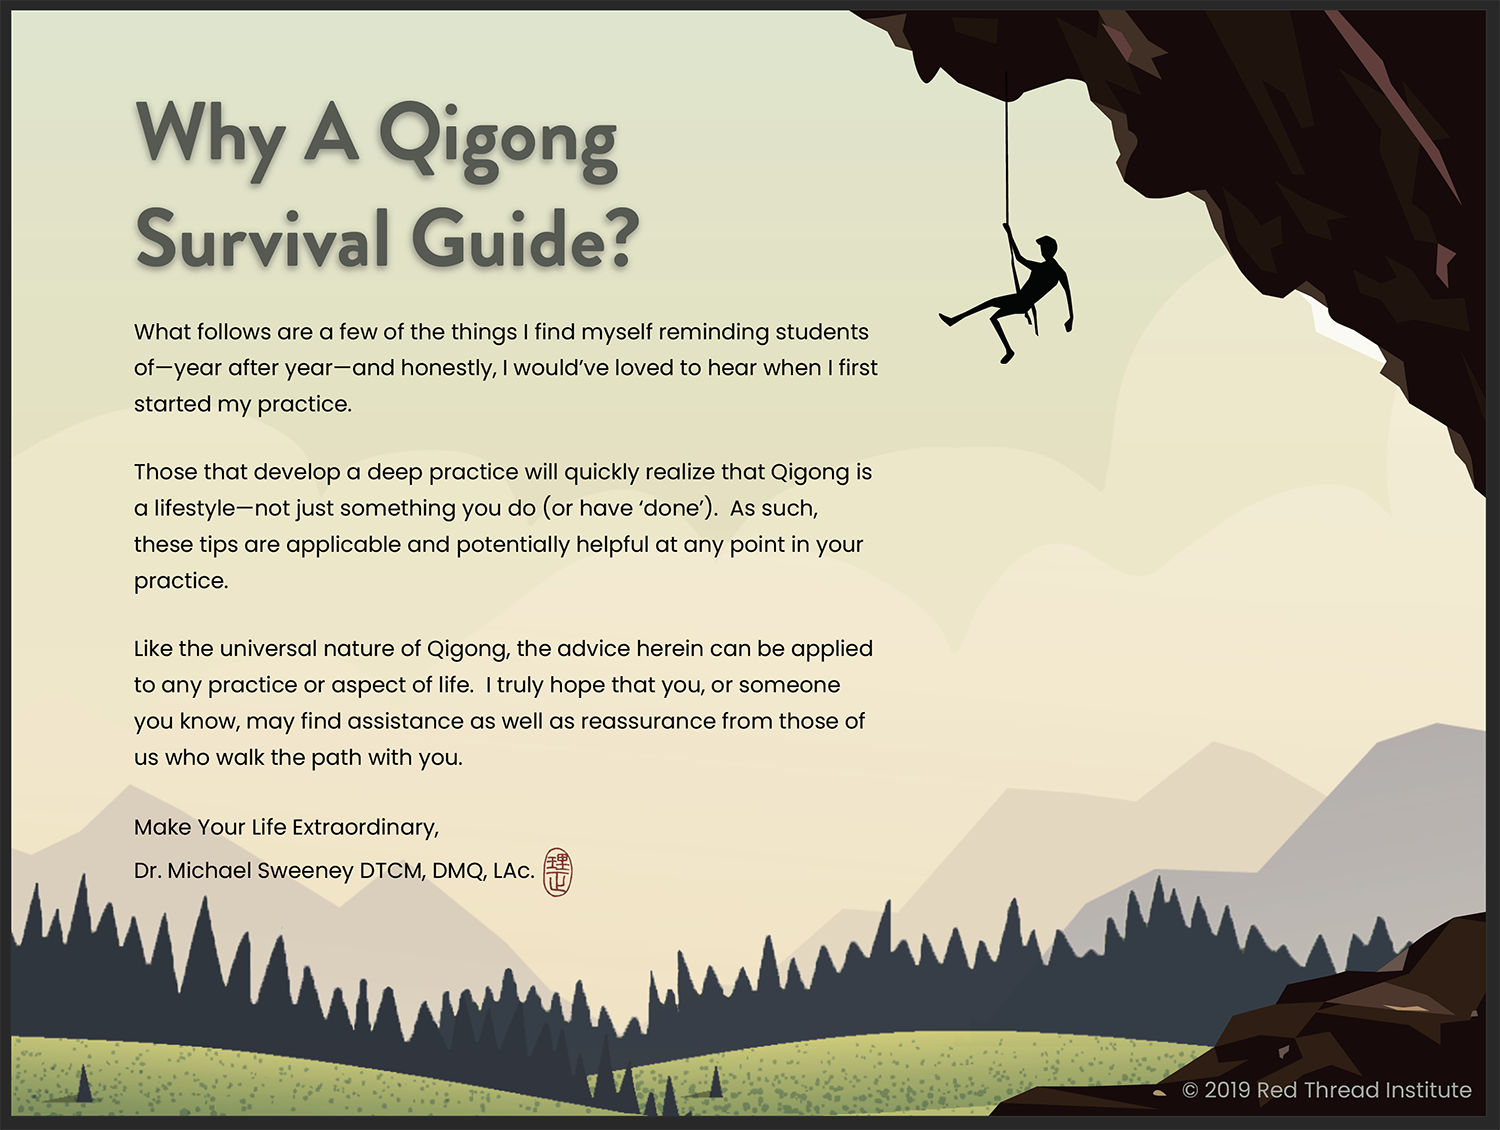 2 Why A Qigong Survival Guide.png